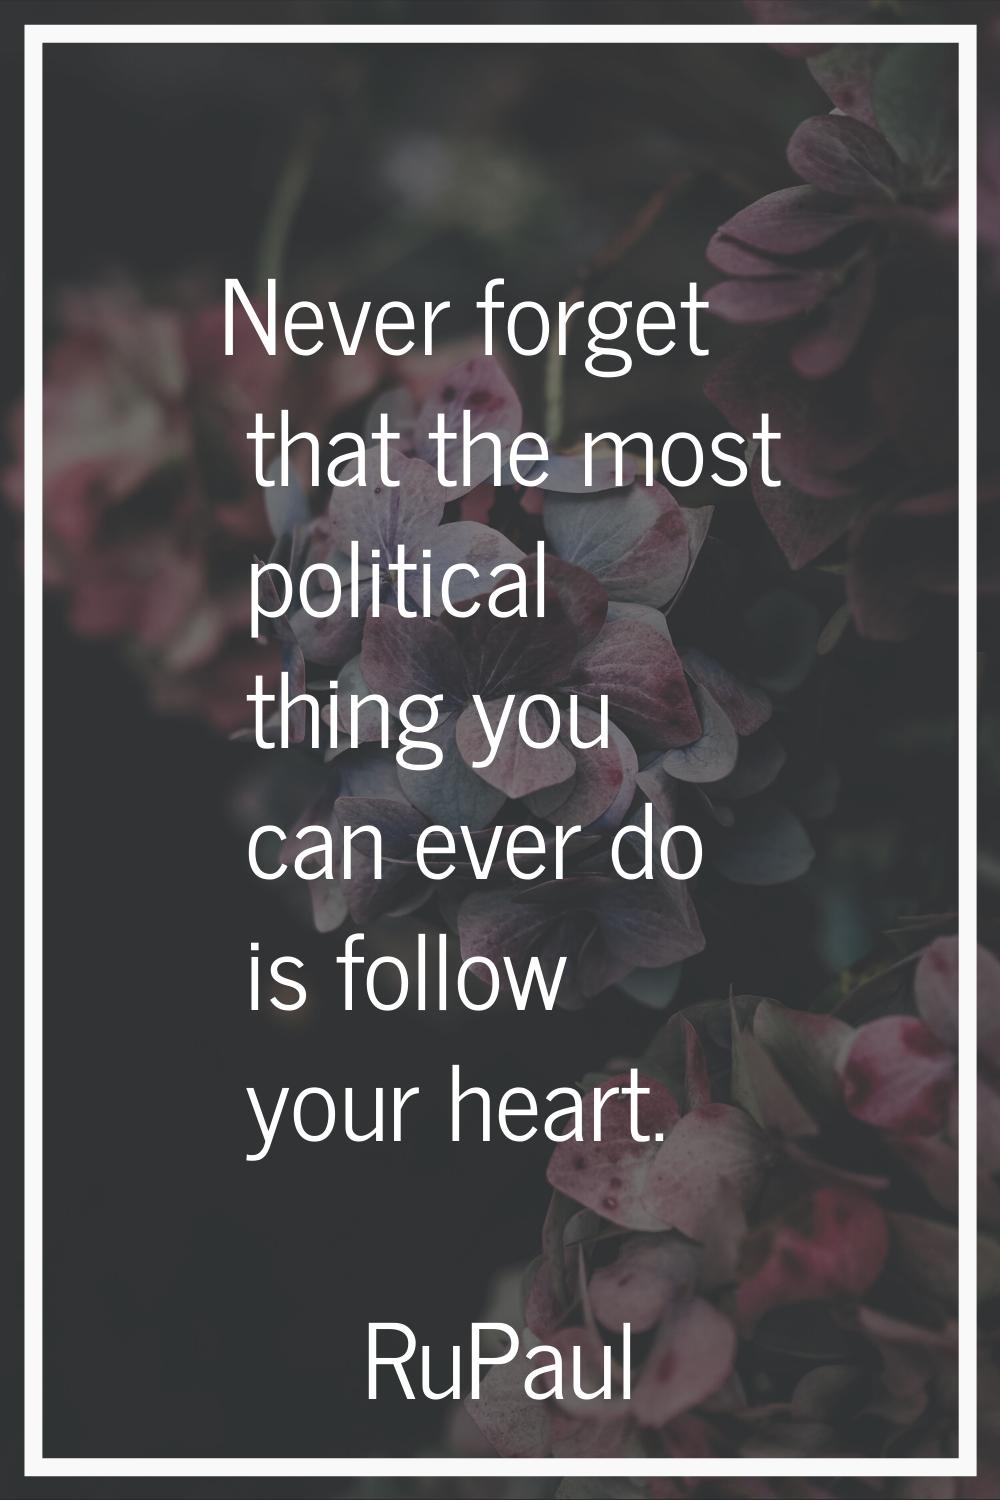 Never forget that the most political thing you can ever do is follow your heart.